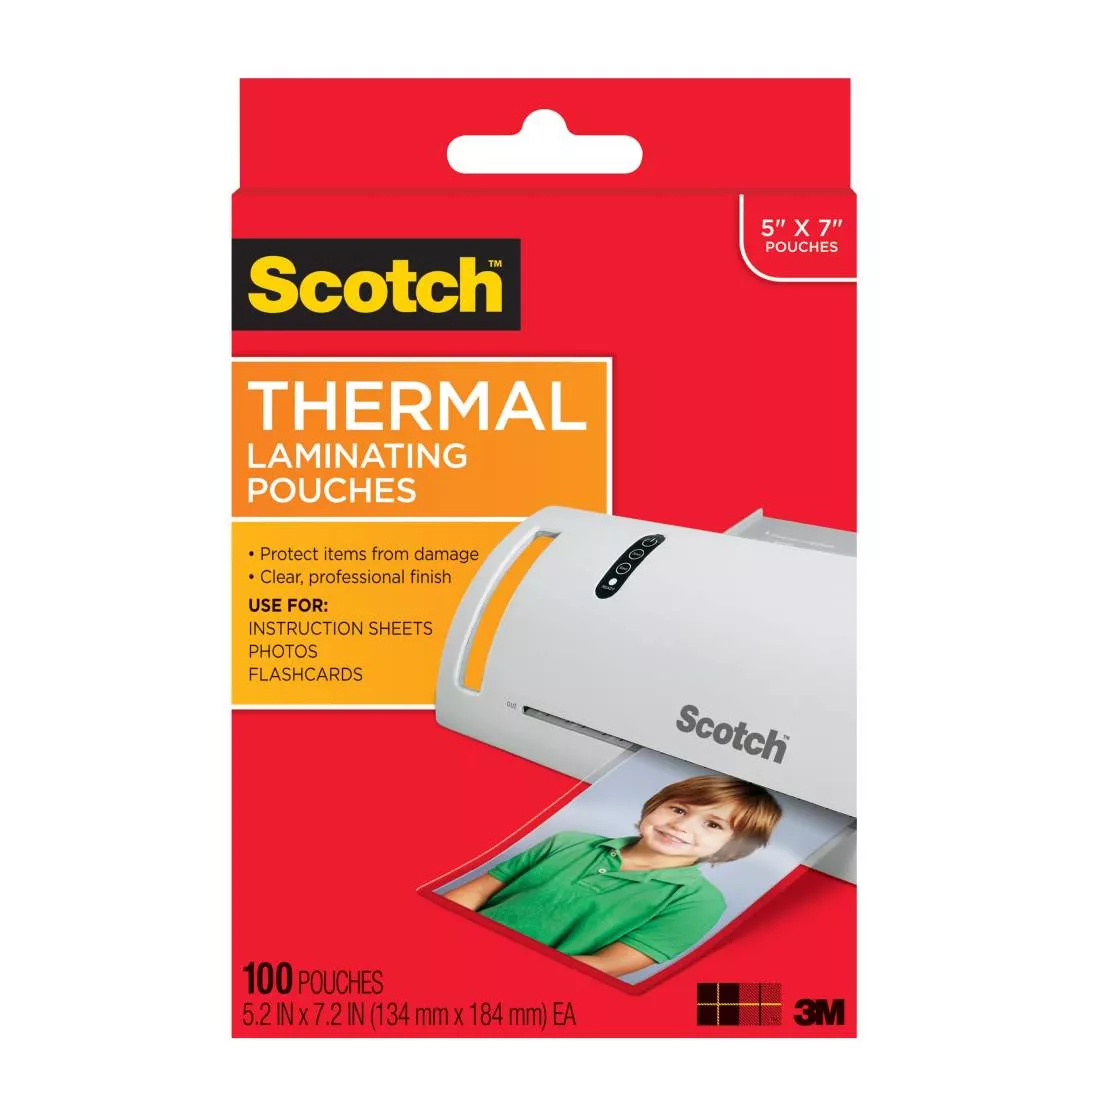 Scotch™ Thermal Pouches TP5903-100, for 5